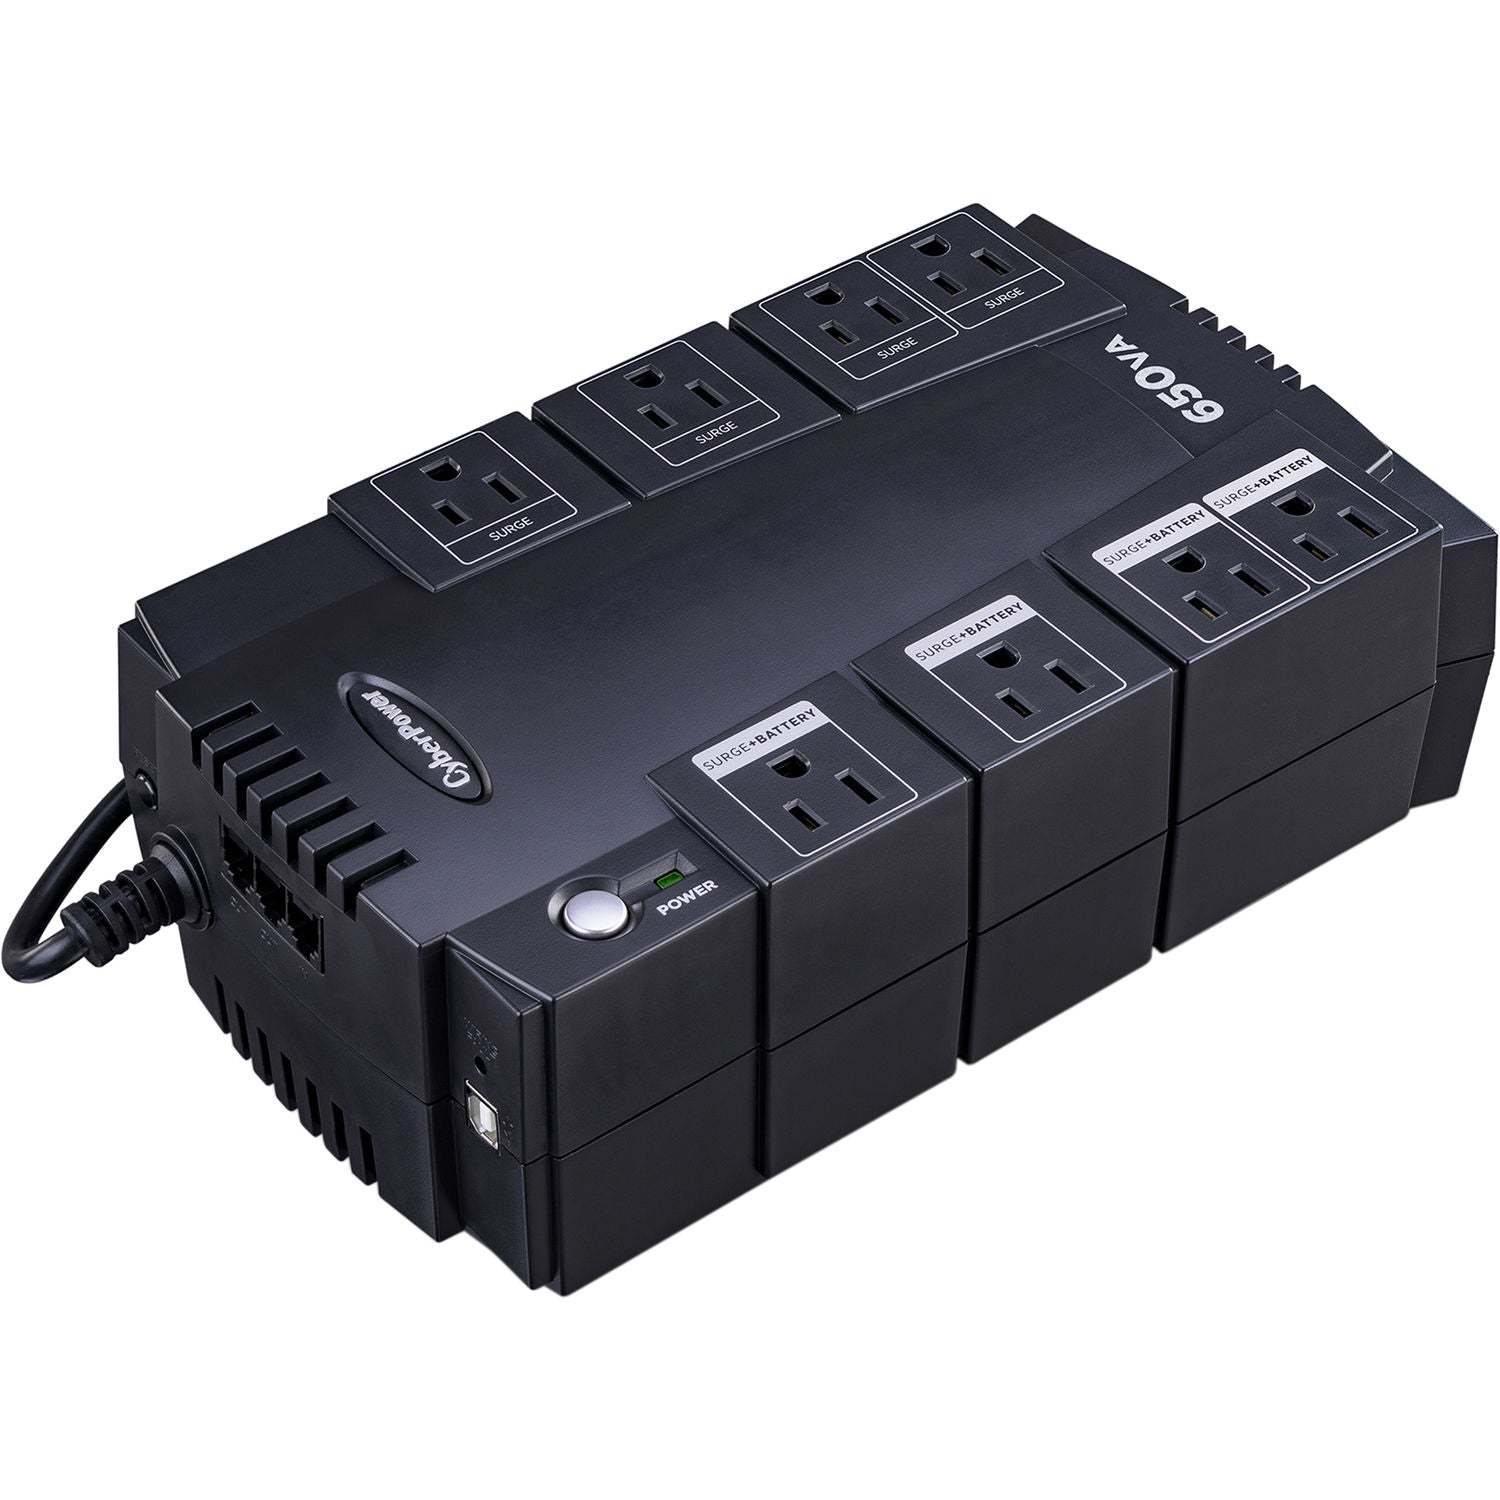 CyberPower SX650G-R 650VA/375W, 8 OL, RJ11/RJ45, 890J 8-Outlet UPS System - New Battery Certified Refurbished